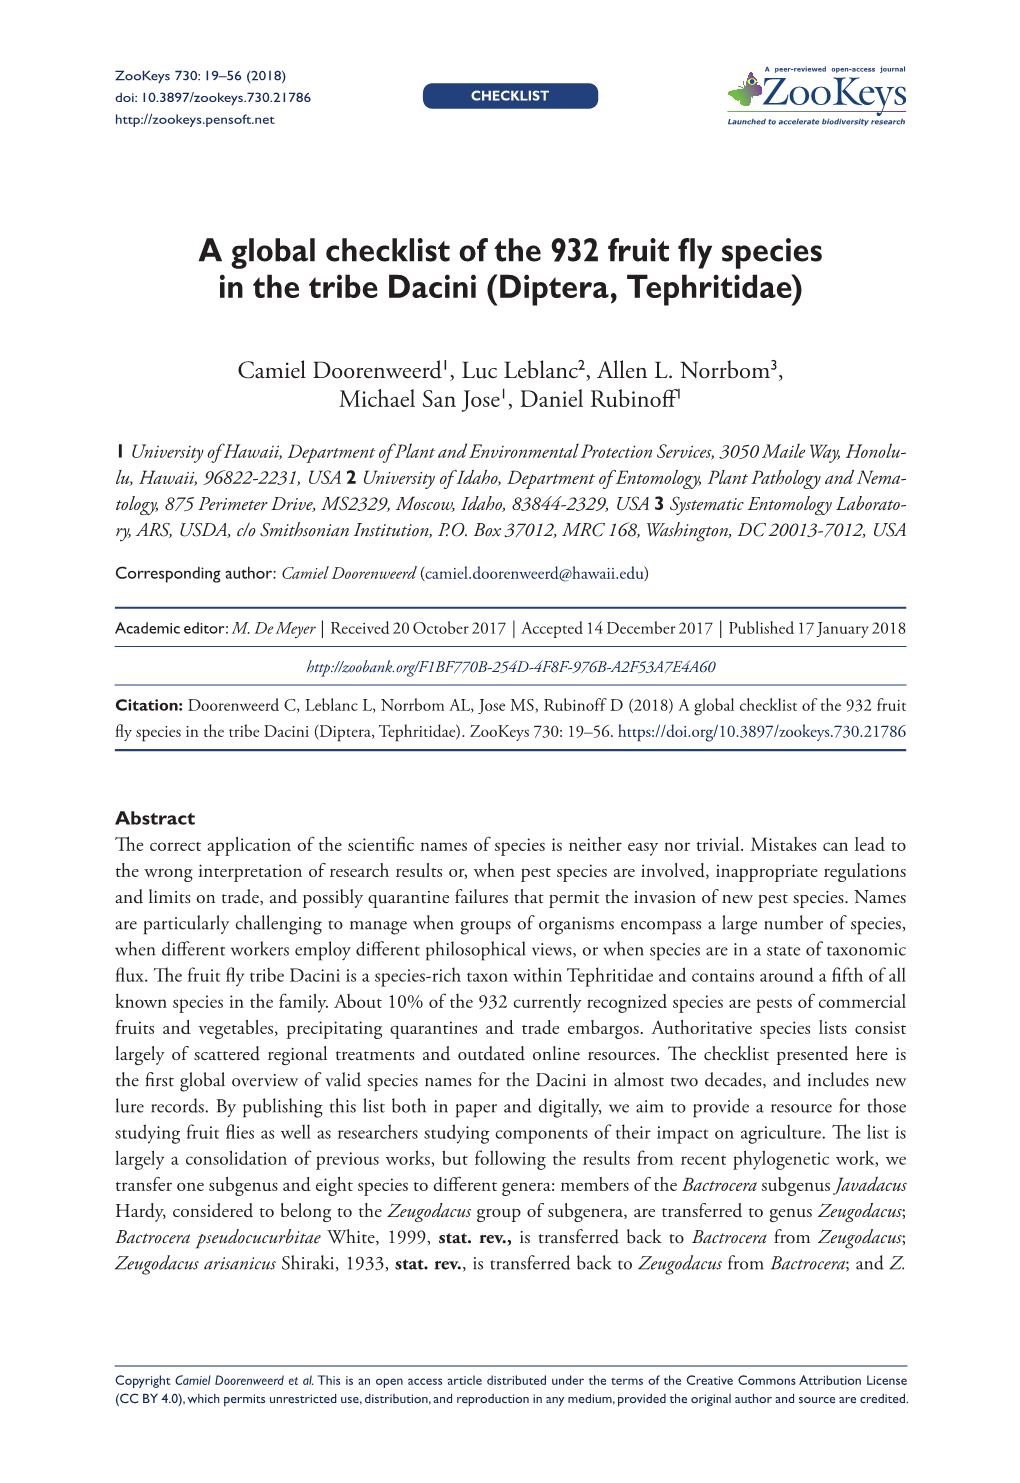 ﻿A Global Checklist of the 932 Fruit Fly Species in the Tribe Dacini (Diptera, Tephritidae)